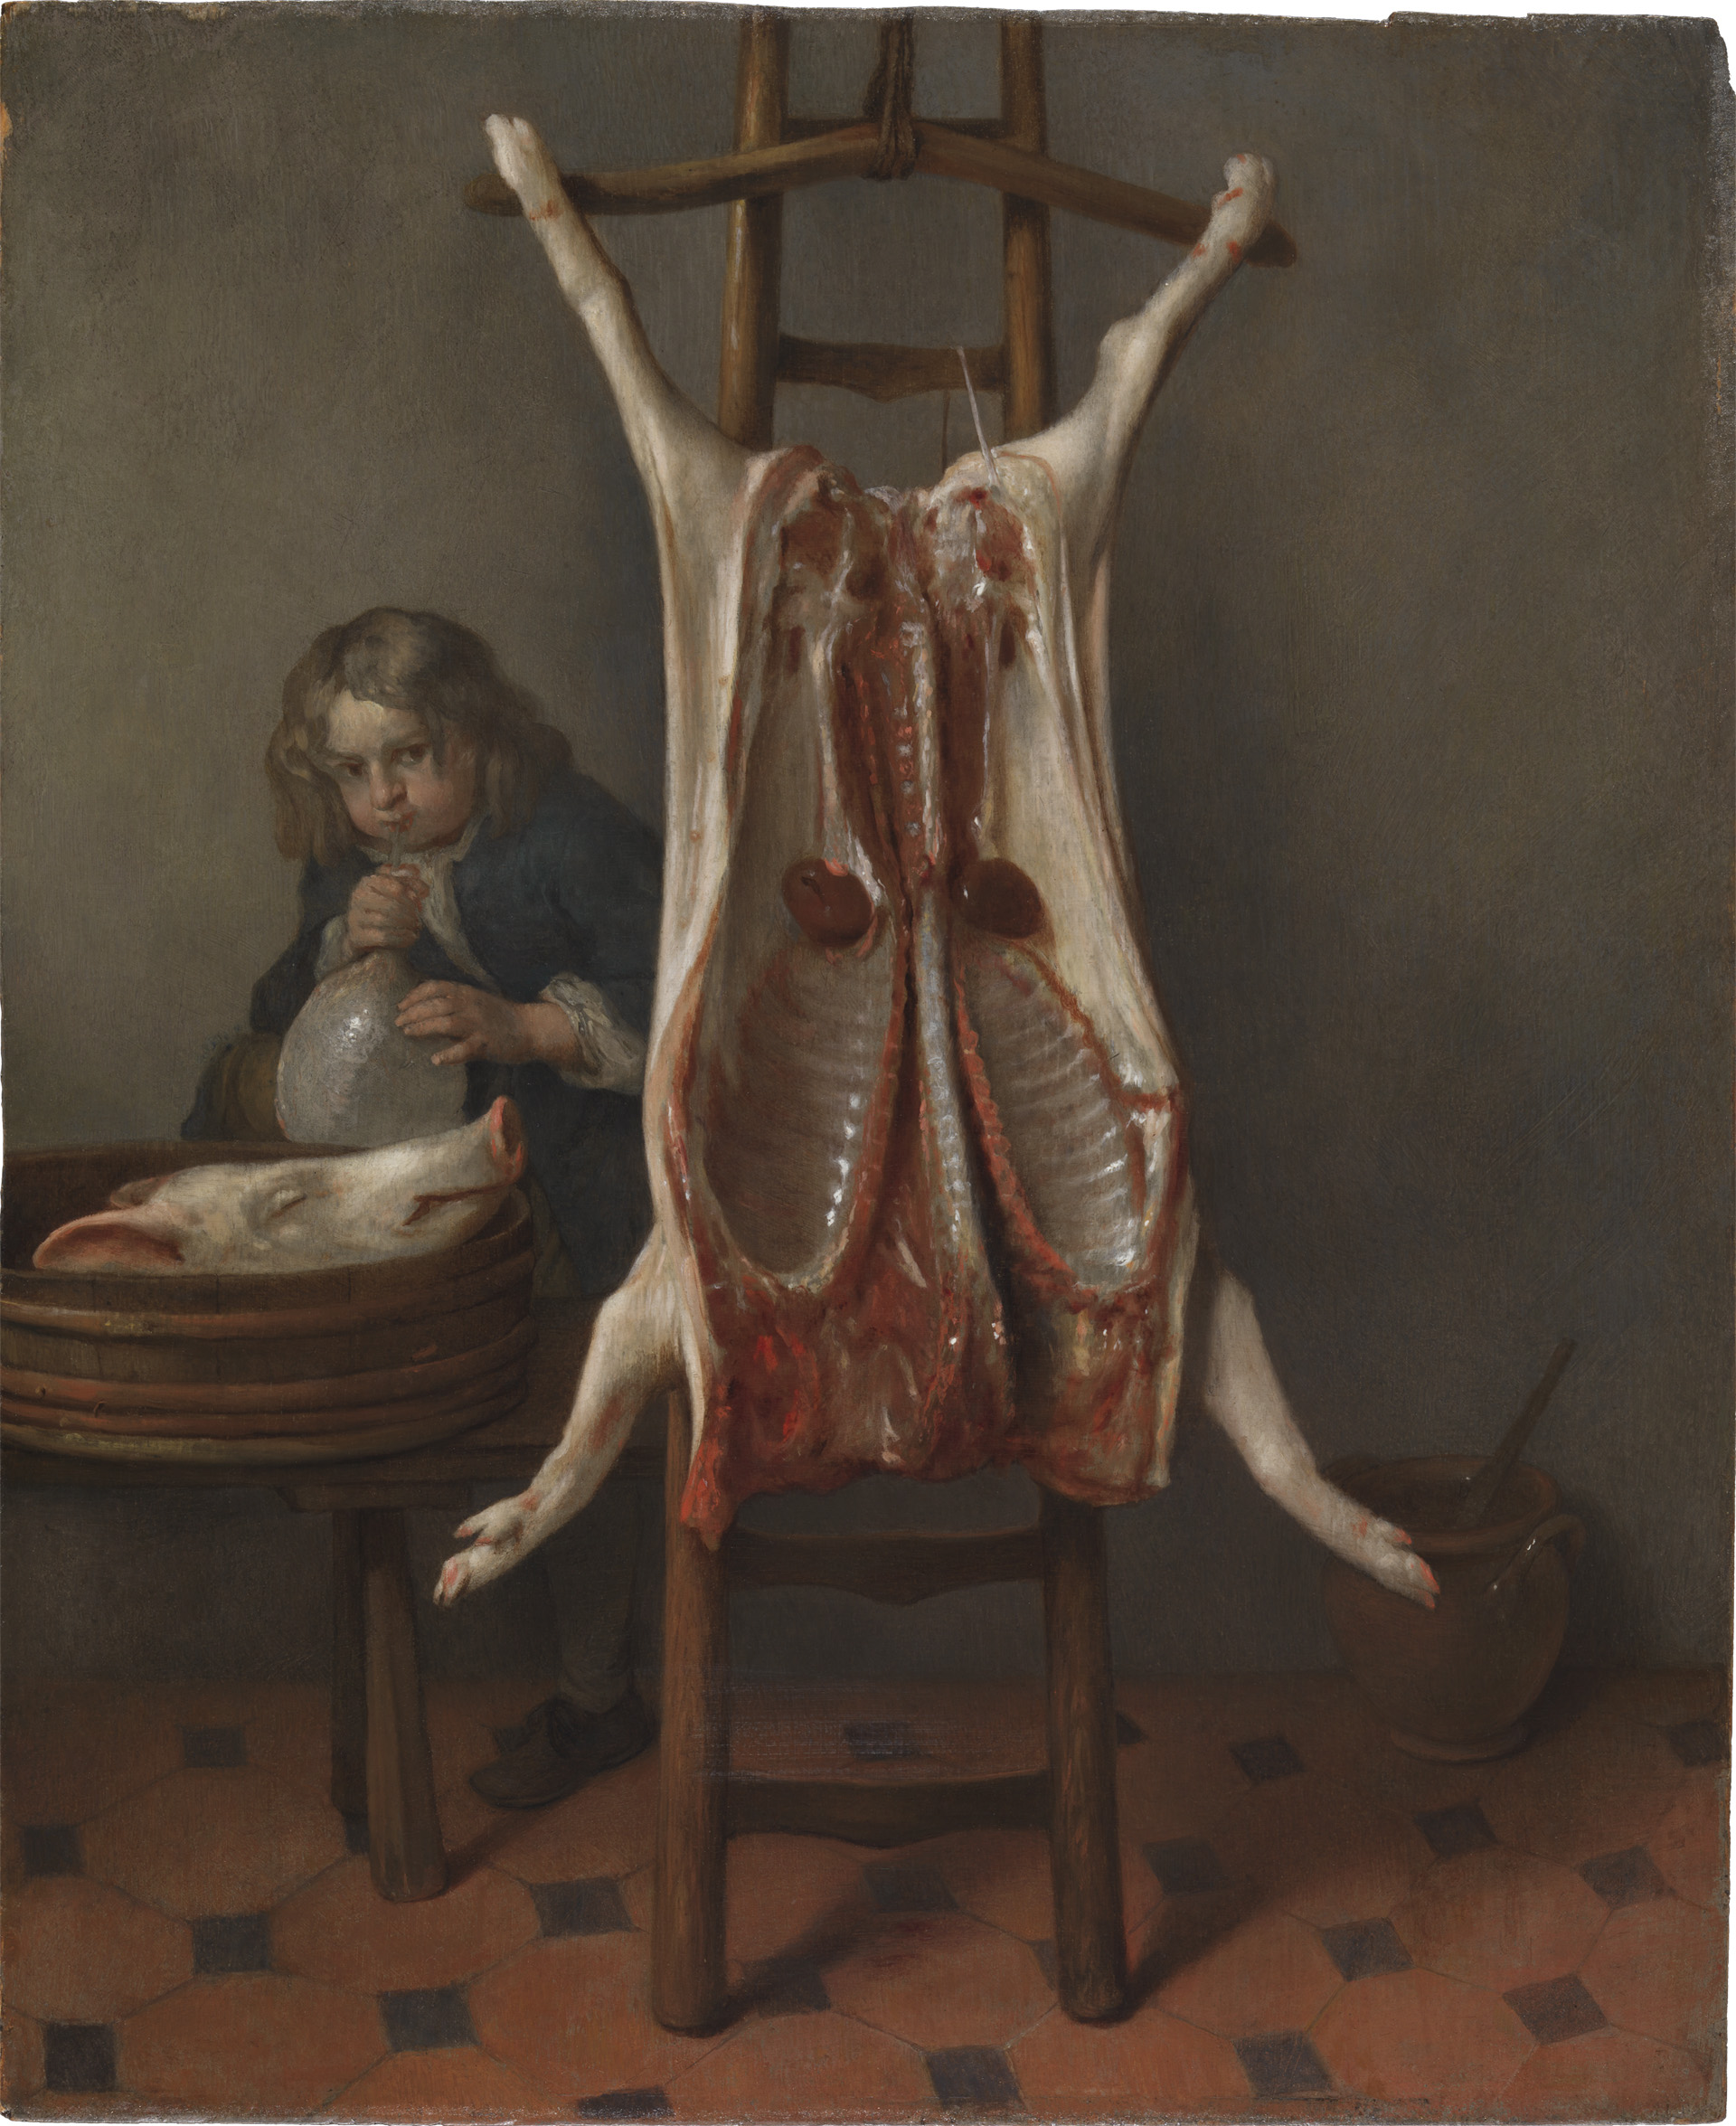 Slaughtered Pig - The Leiden Collection